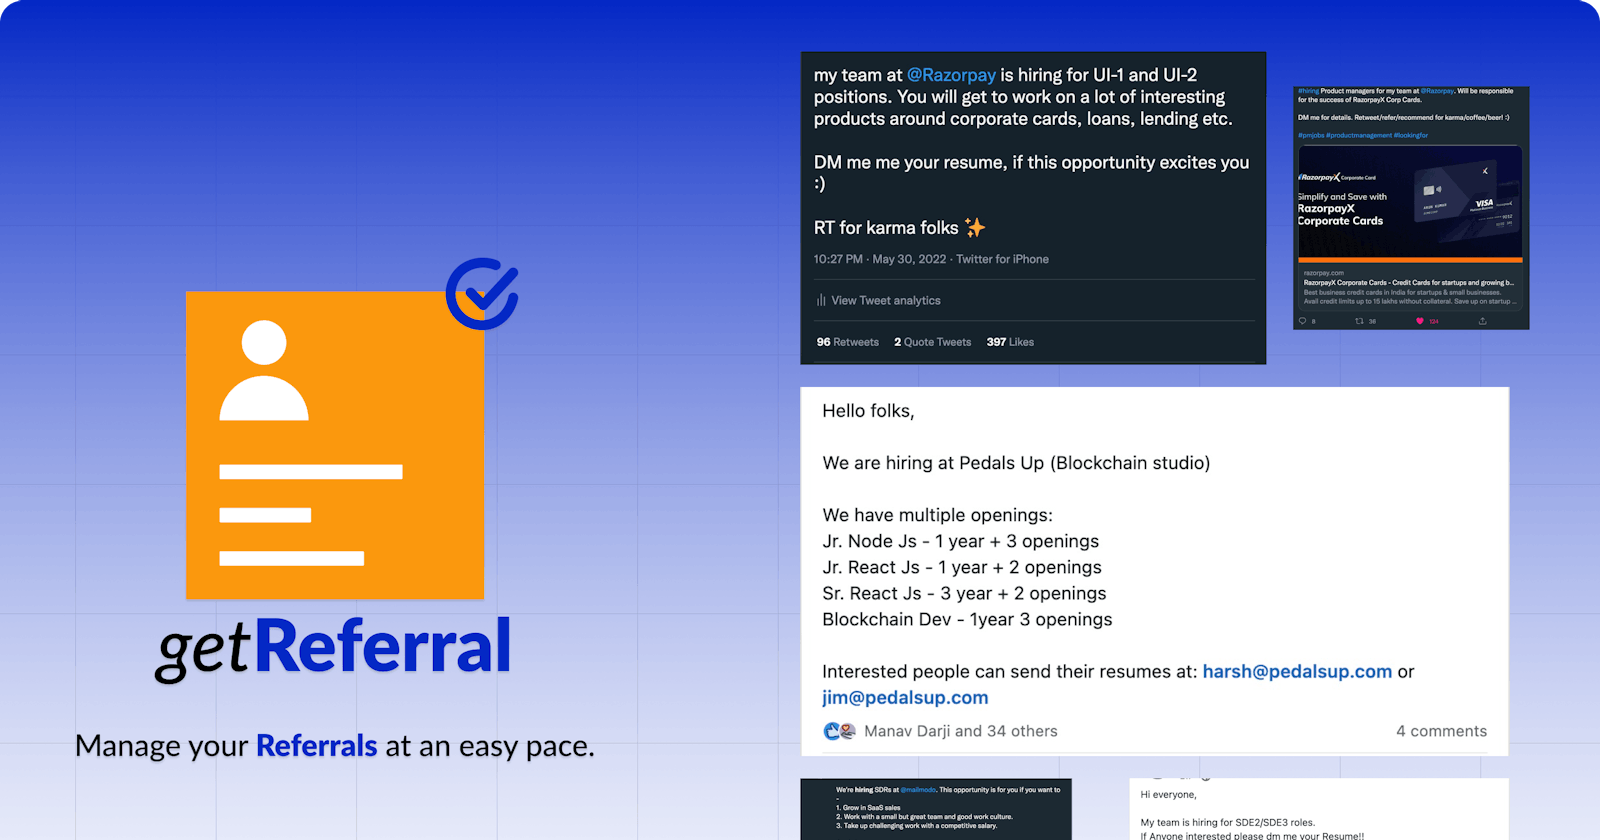 getReferral - Manage referrals easily and apply at one click for openings.